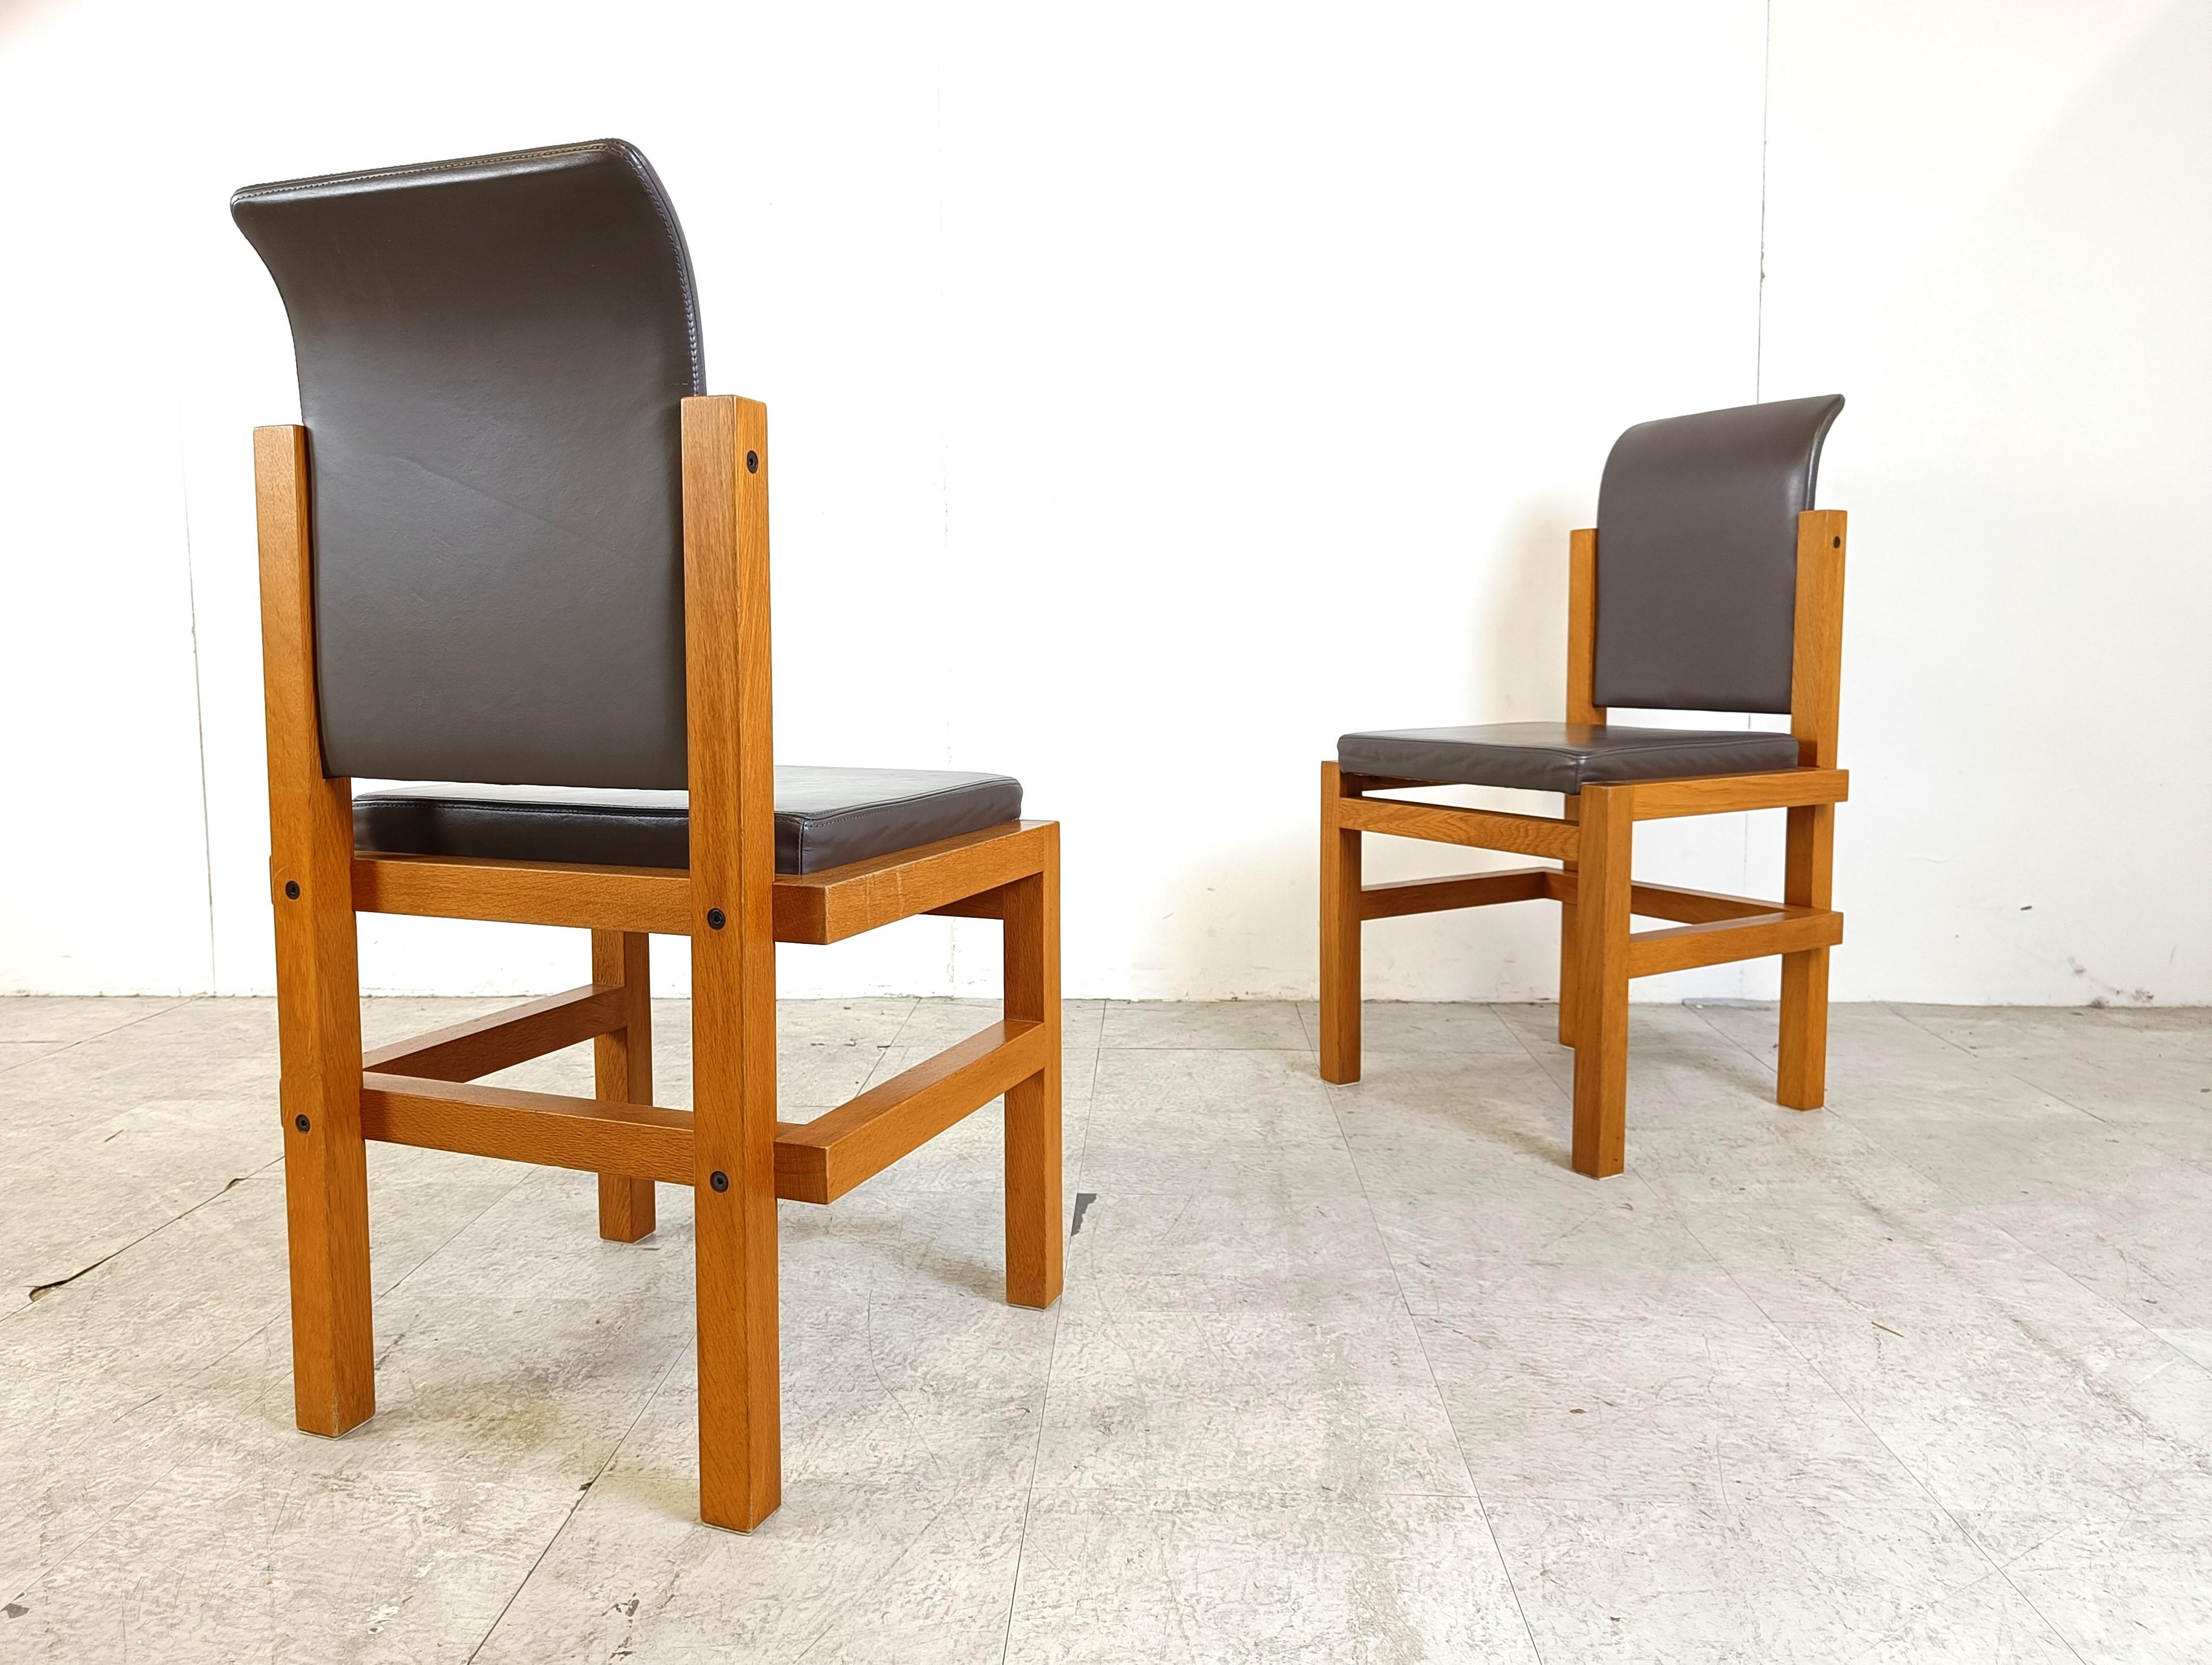 Set of 6 dining chairs with an architectural solid oak frame and grey stiched leather upholstery.

The chairs are comfortable with a timeless playful design.

Very good condition.

All stamped 'Meubelatelier Vanda - Watervliet' 

1970s - Made in